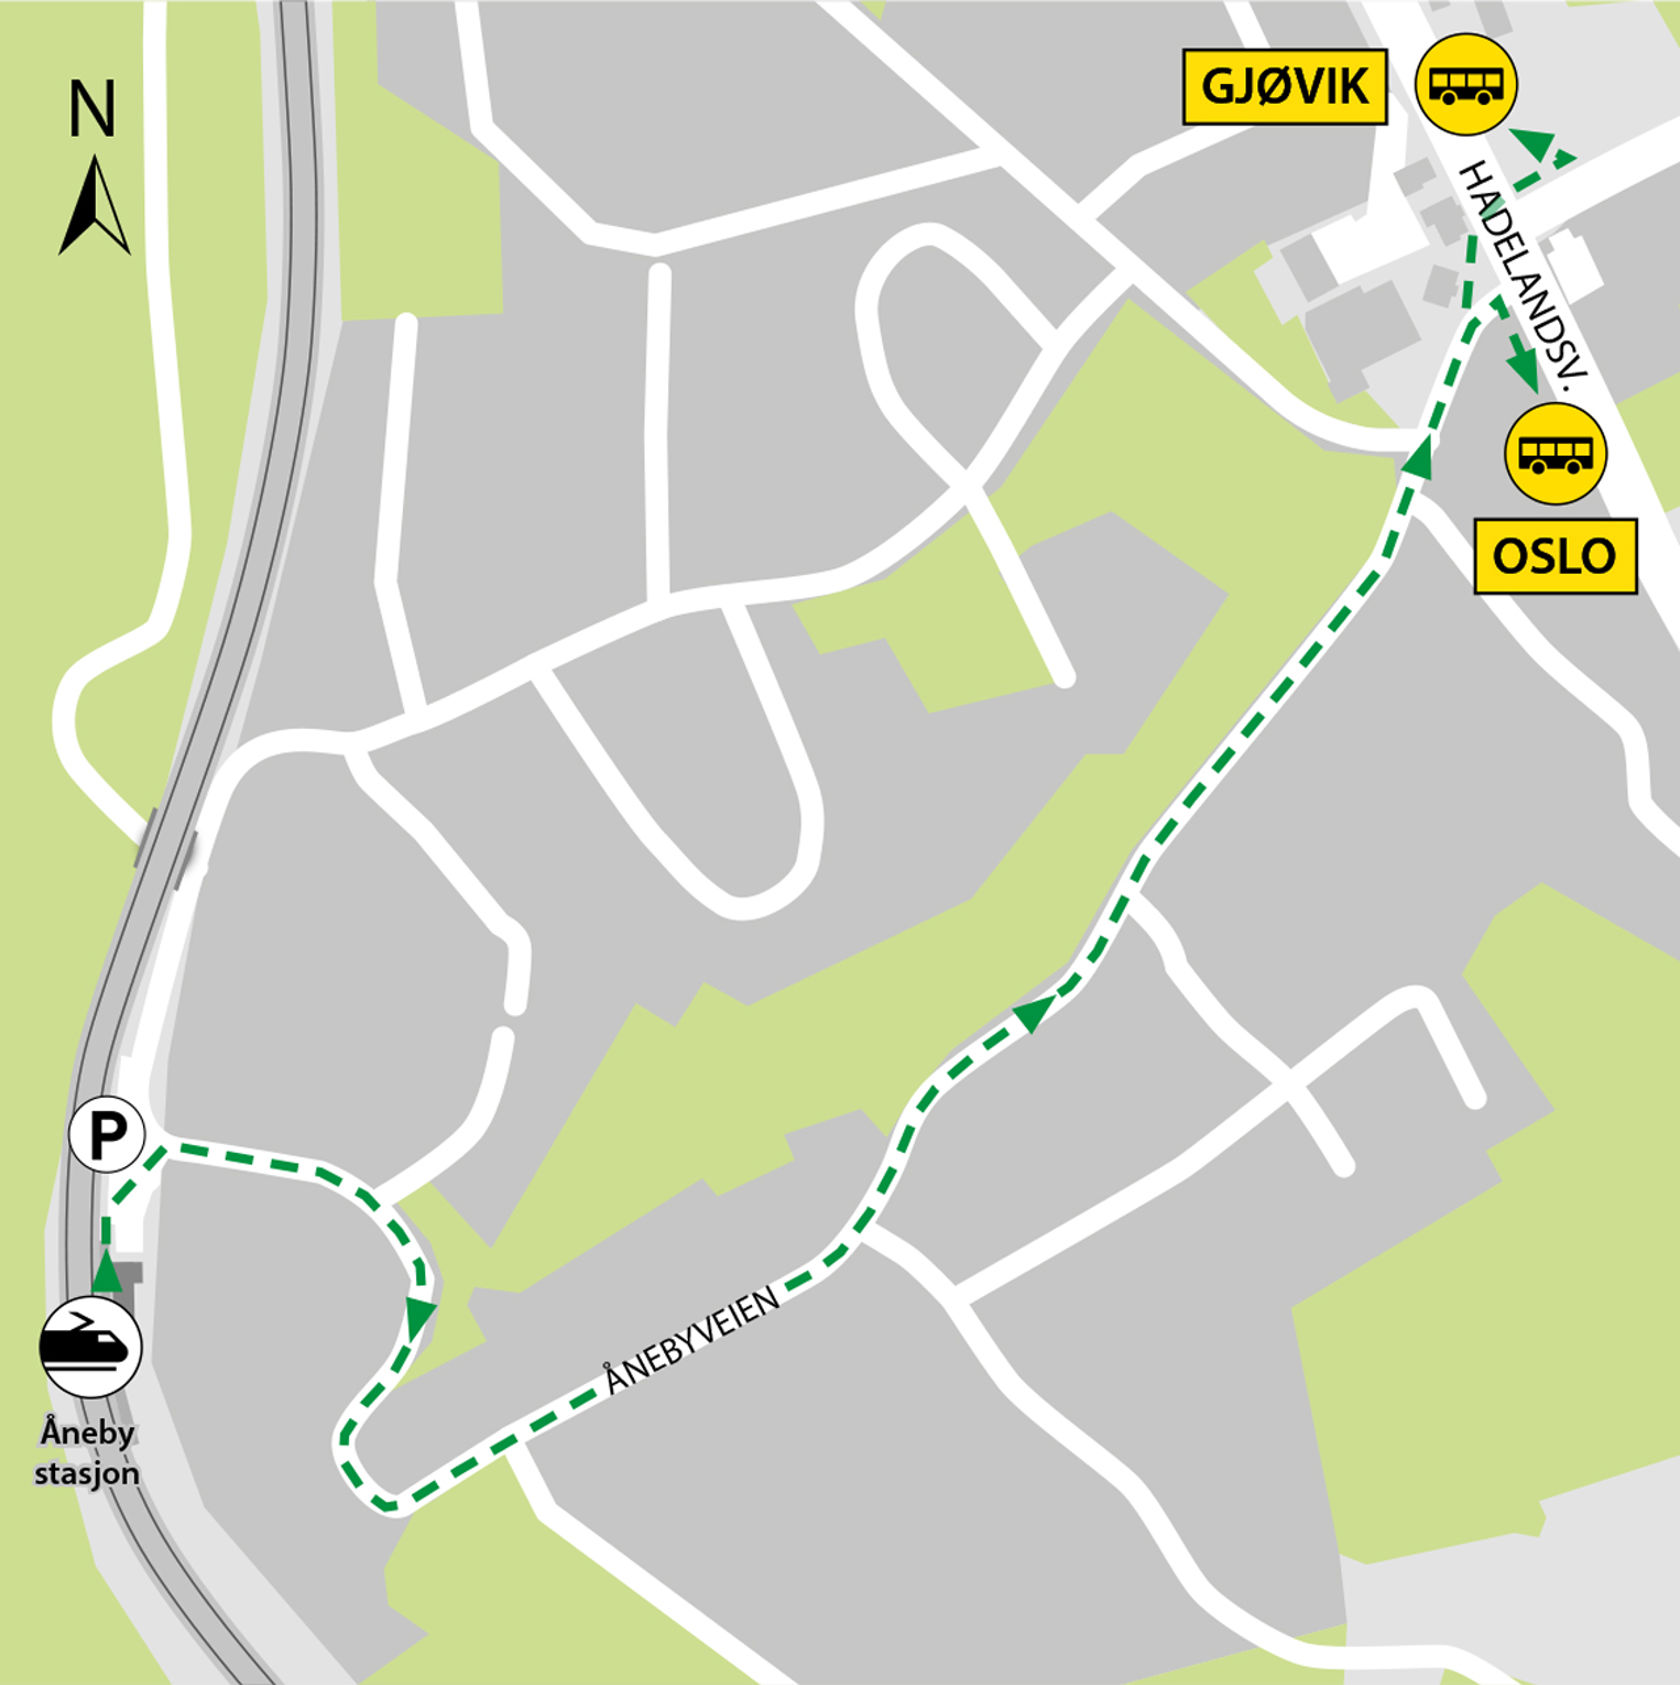 Map shows rail replacement service departs from bus stop Åneby located in Hadelandsveien, RV4.